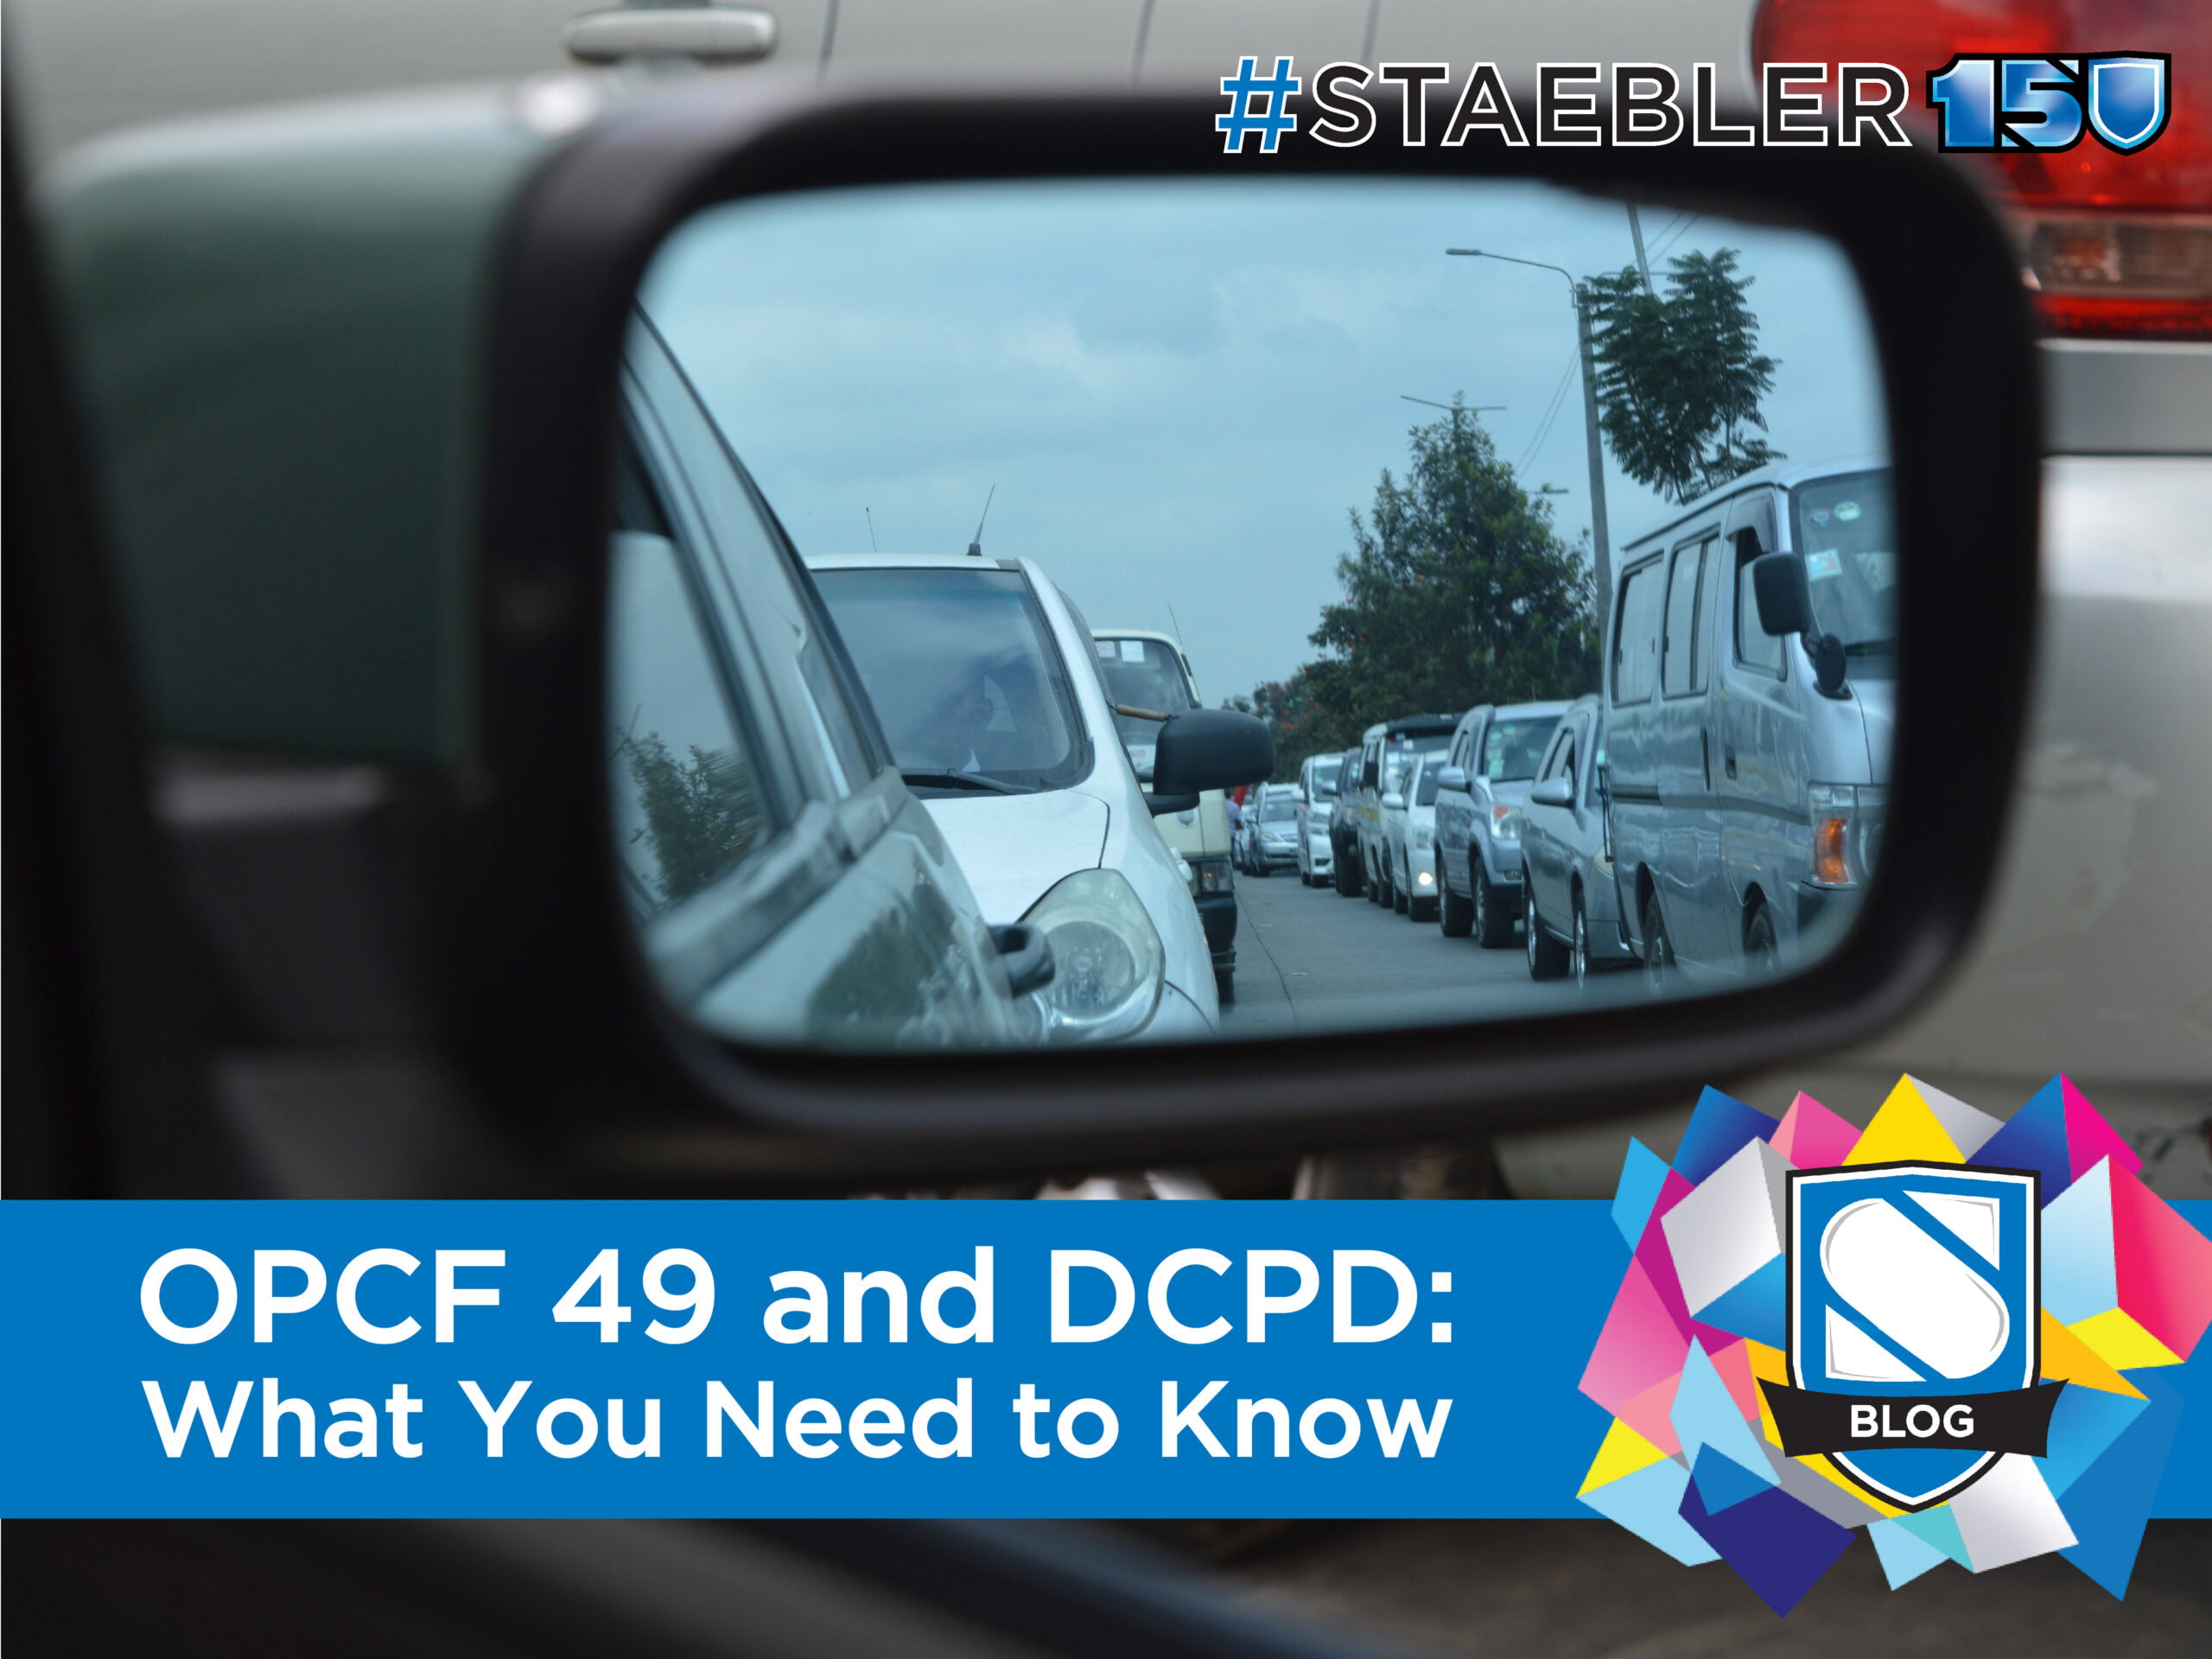 What You Need to Know About OPCF 49 and DCPD